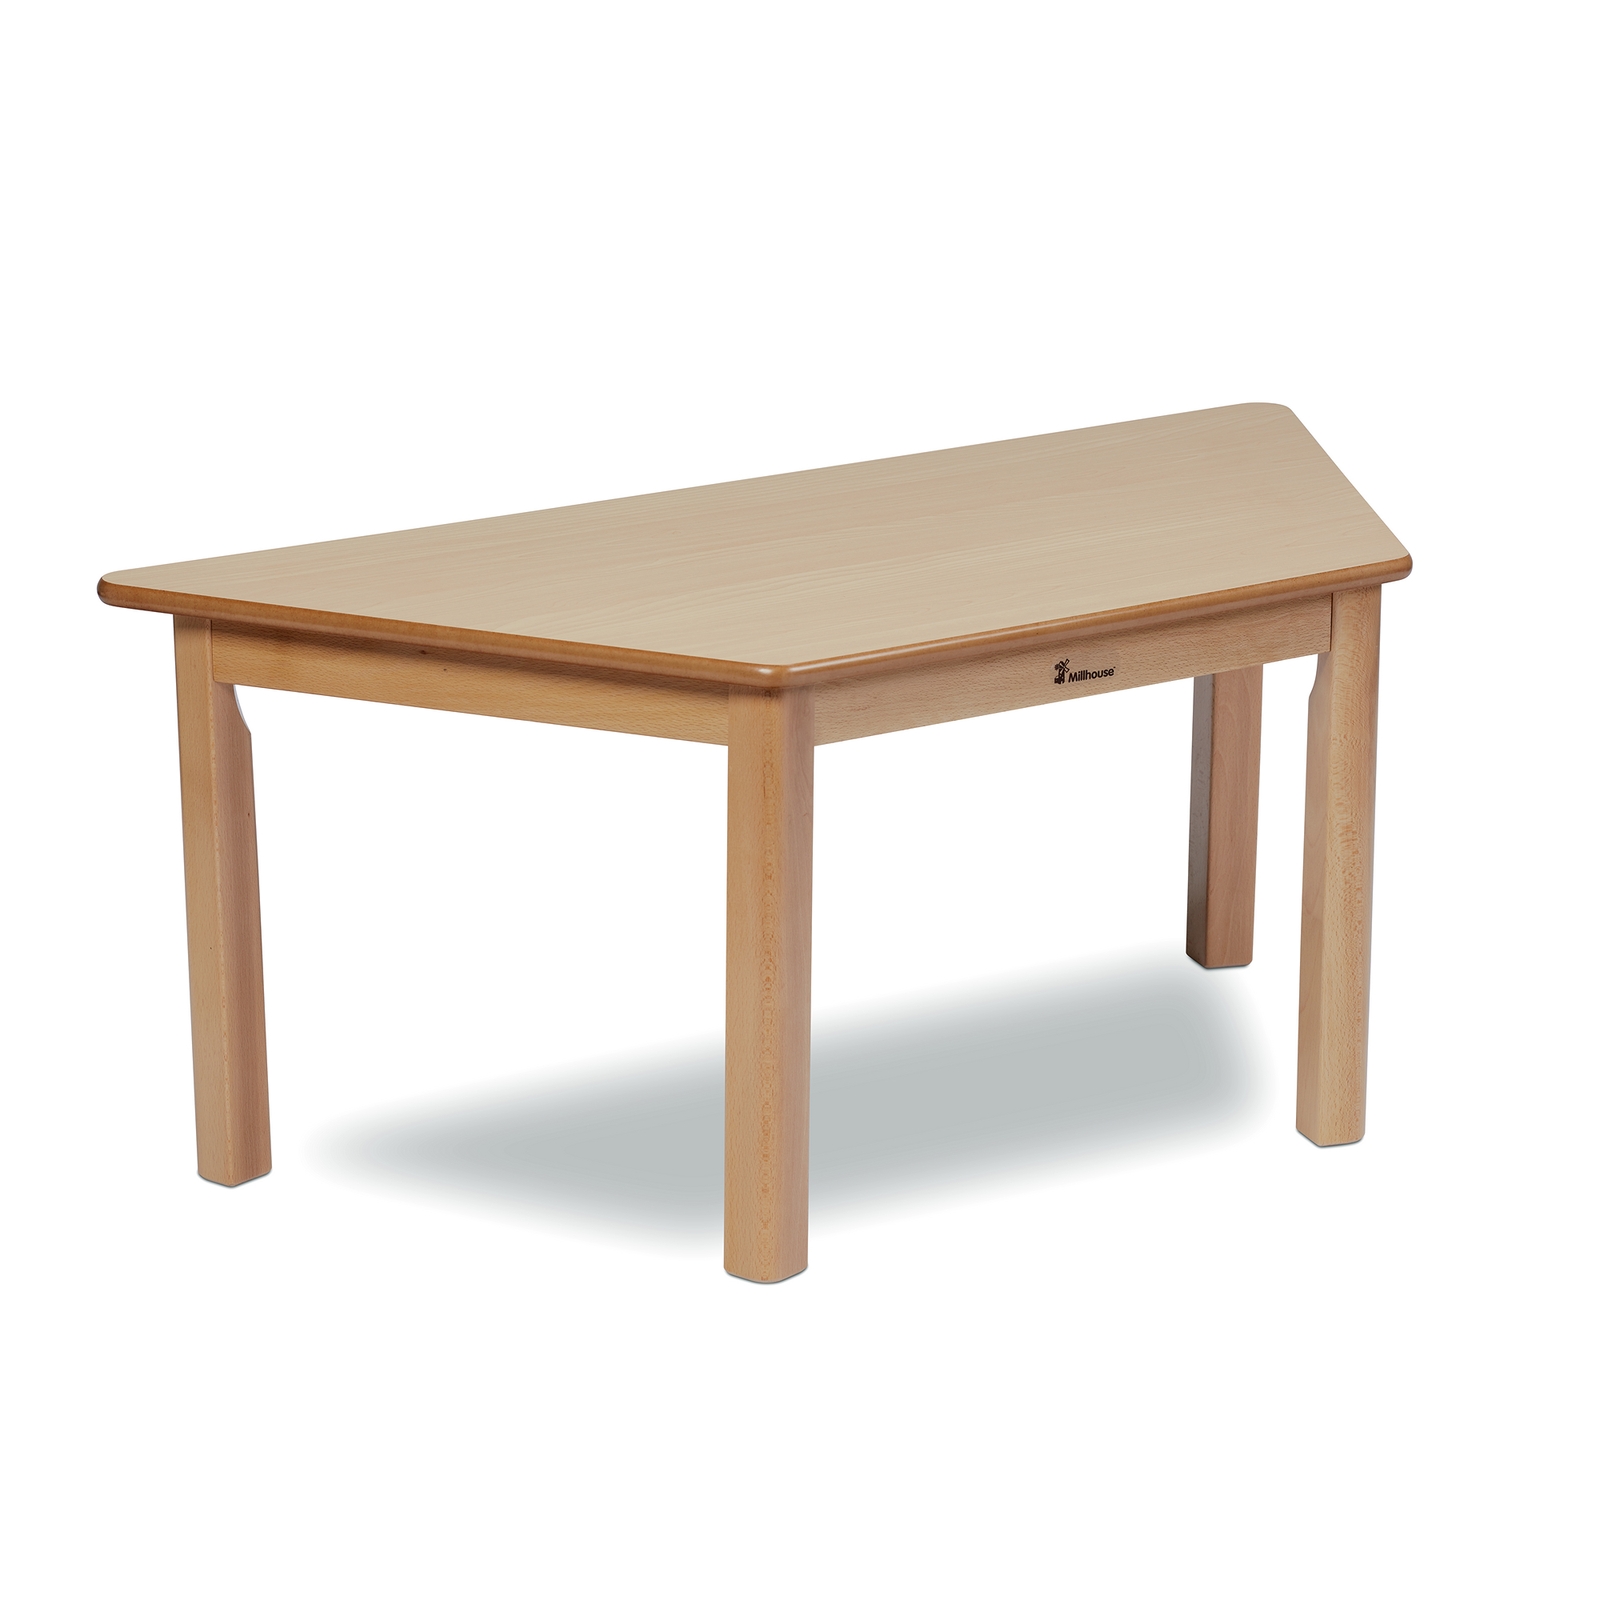 Playscapes Trapezoid Table - 320mm Height